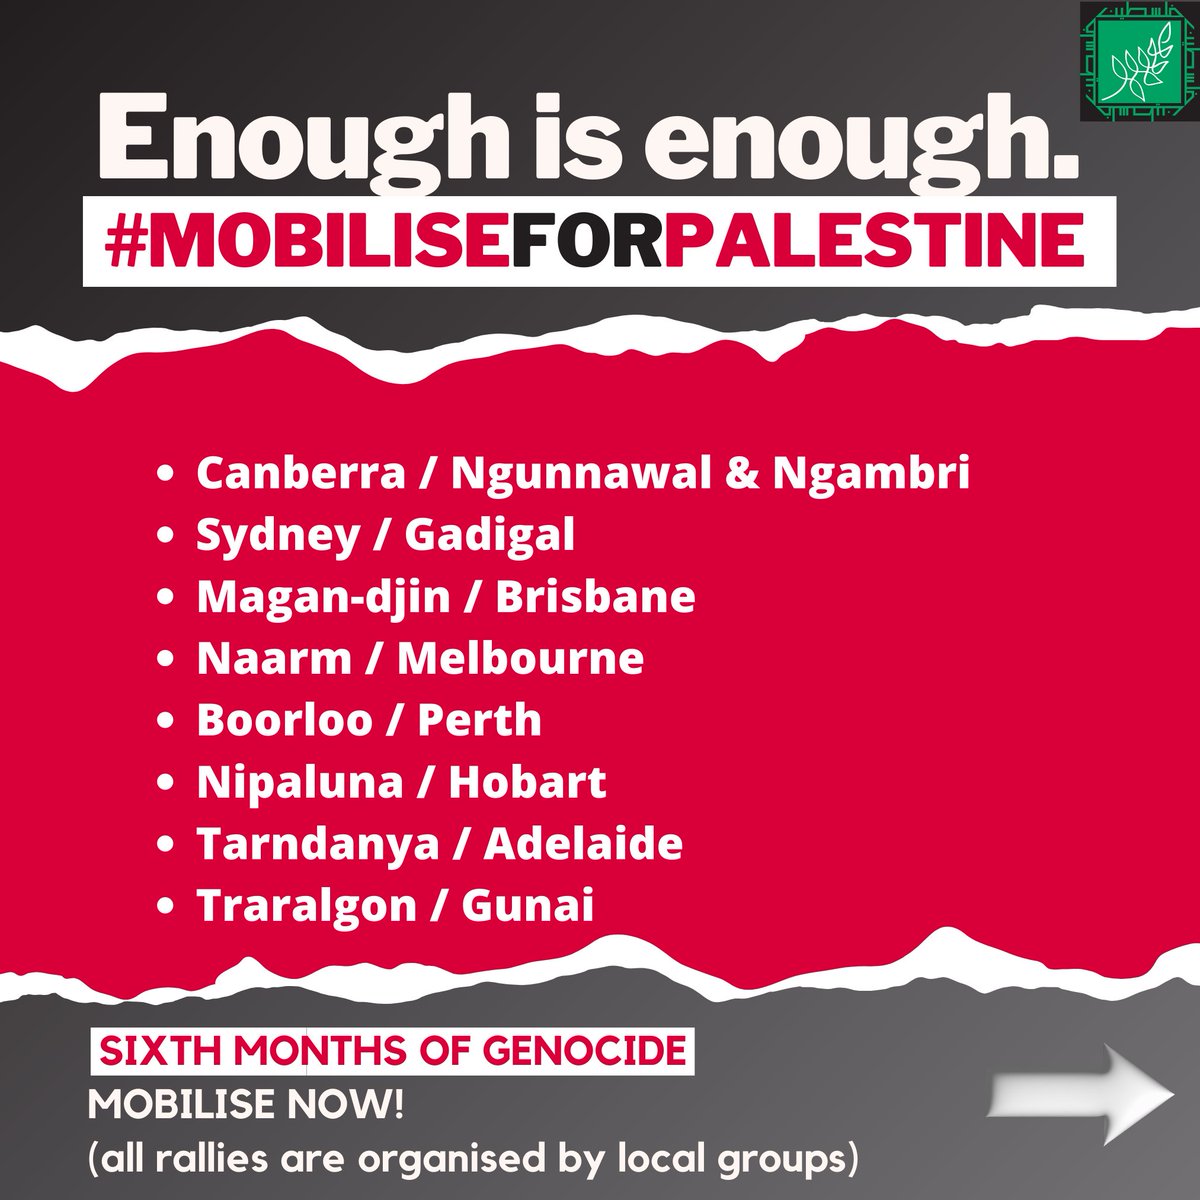 1/3 This weekend, we mark 6 months since the beginning of the genocide in Gaza. ENOUGH IS ENOUGH. Mobilise for Palestine this weekend - help organisers make it the largest mobilisation across the continent.